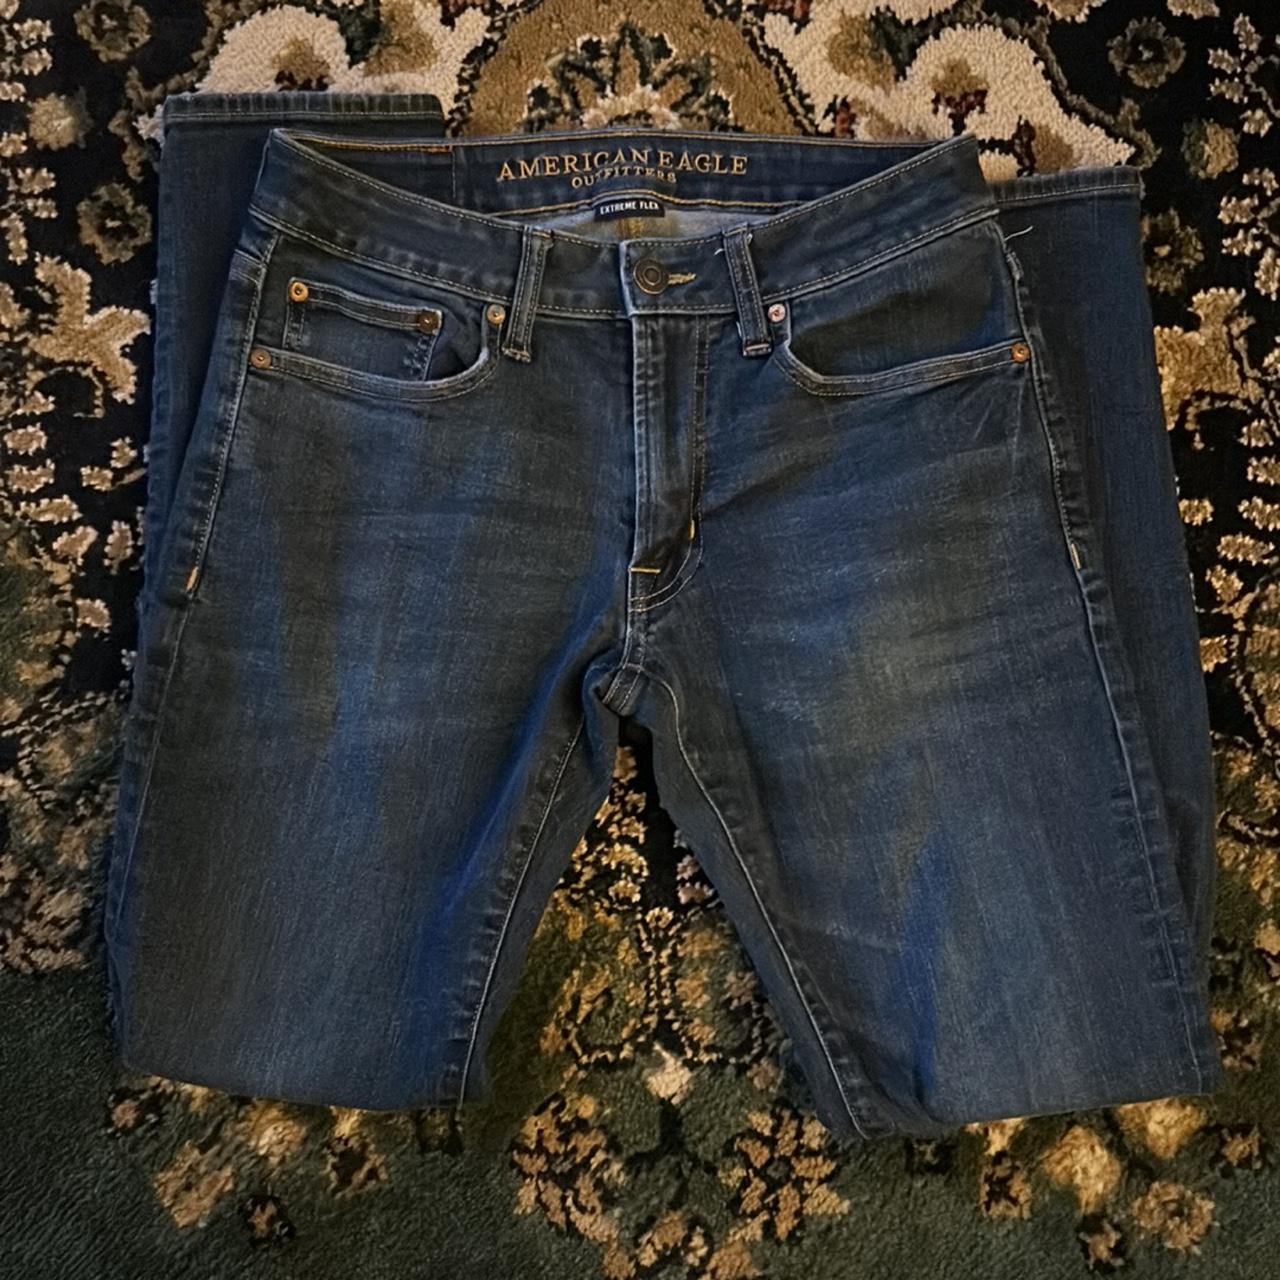 American Eagle Outfitters Men's Blue and Navy Jeans | Depop